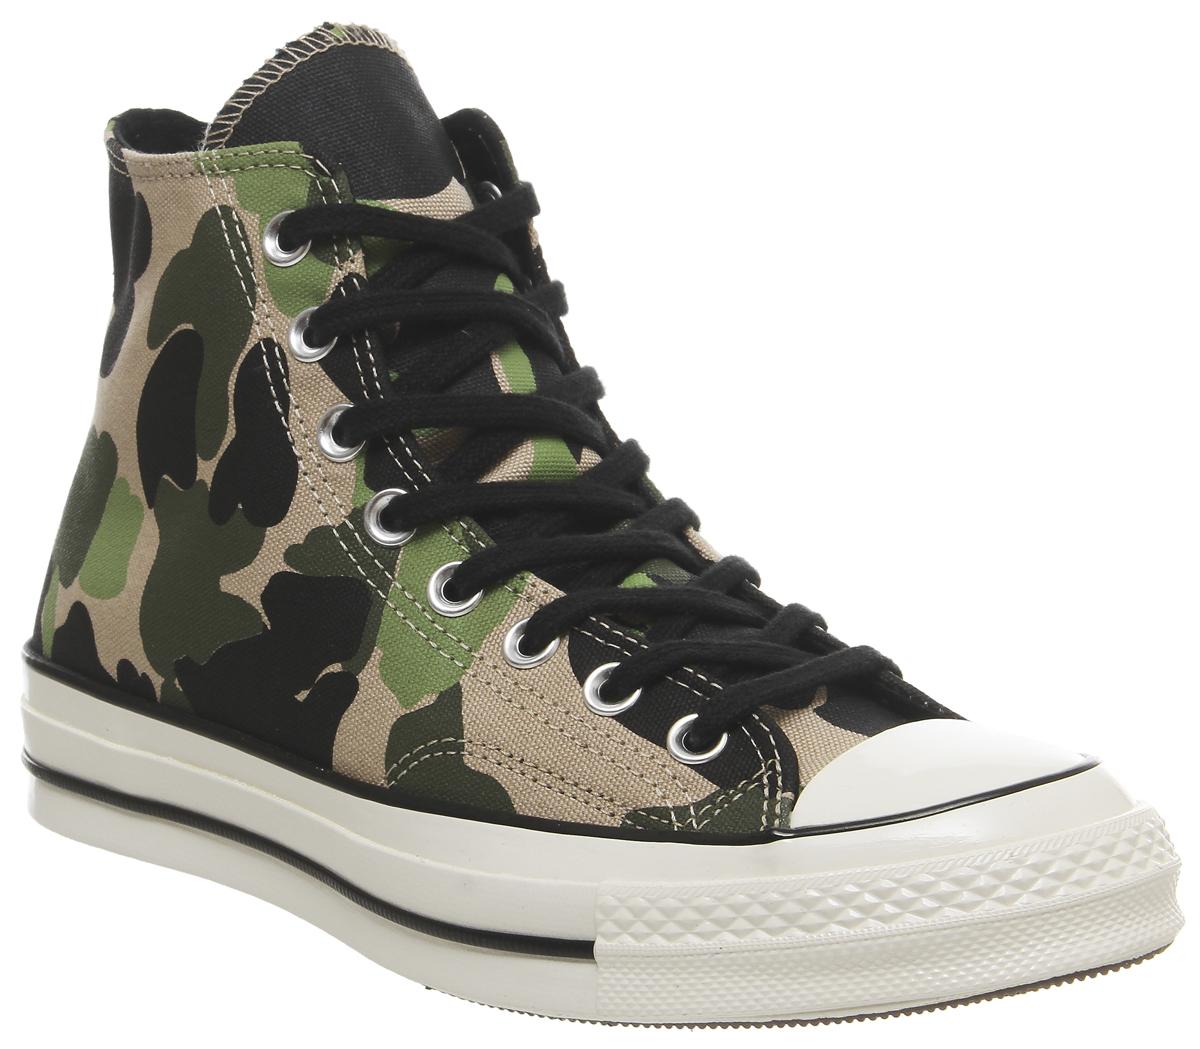 ConverseAll Star Hi 70's TrainersCamo Candied Ginger Piquant Green